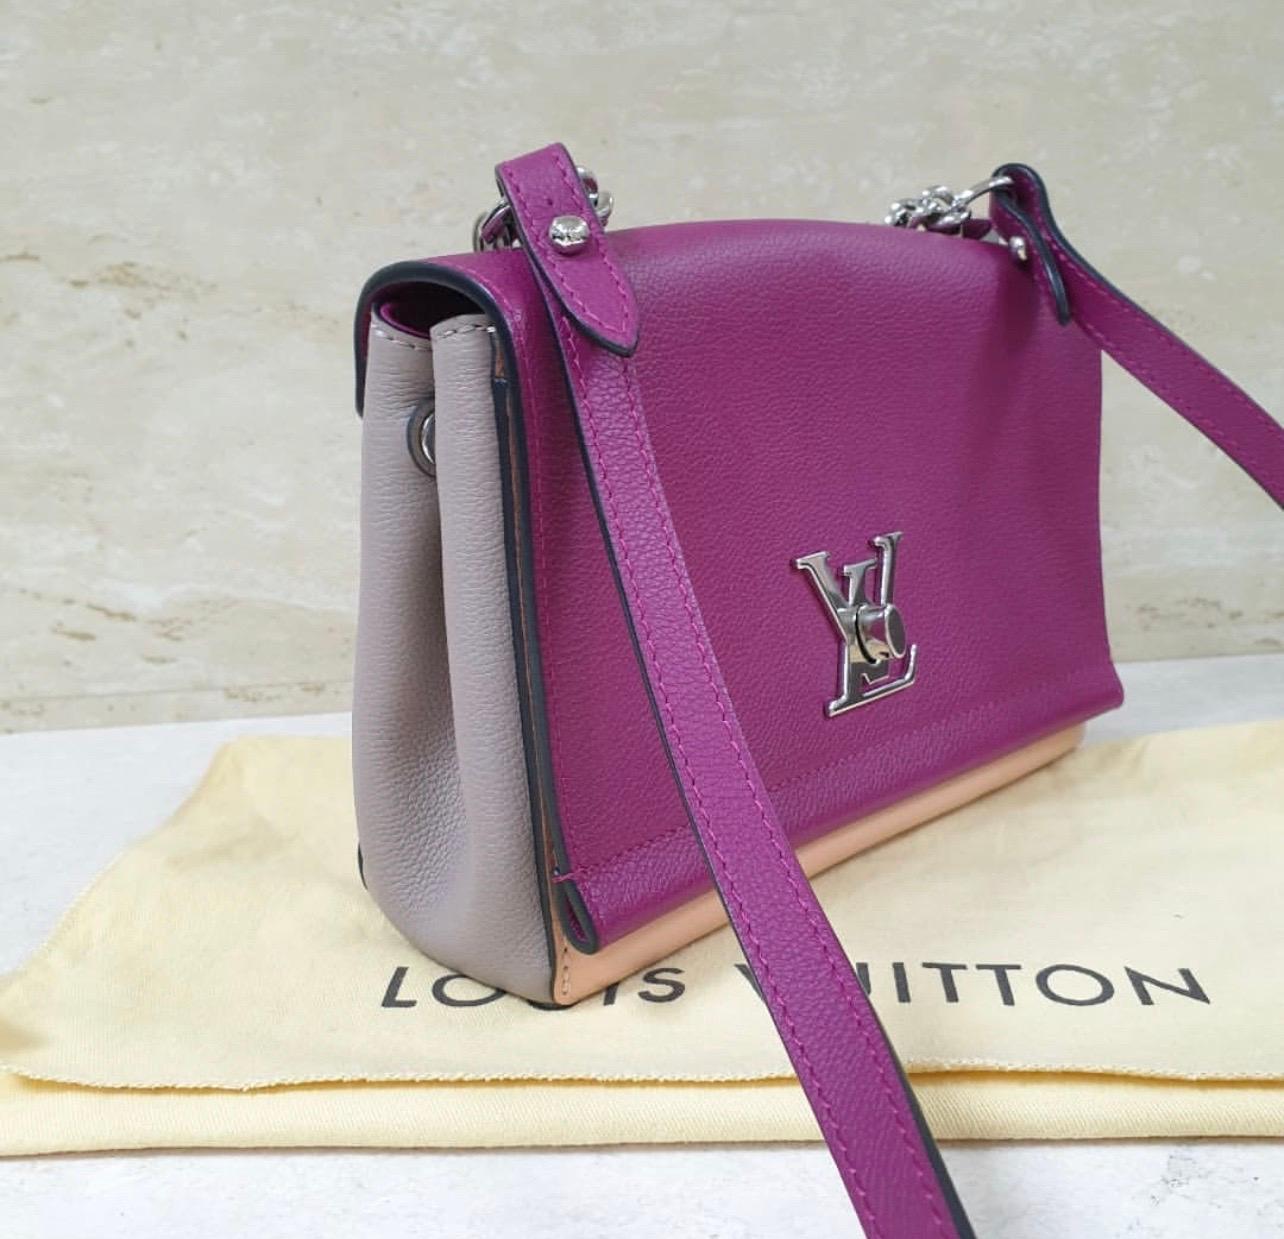 LOUIS VUITTON Lockme II BB Gra.Venu.Mas City Bag
This authentic Louis Vuitton Lockme II Handbag Leather BB is a must-have signature city bag made for the modern woman. 
Multiple colors 
Included dust bag and invoice.
Very good condition.
For buyers